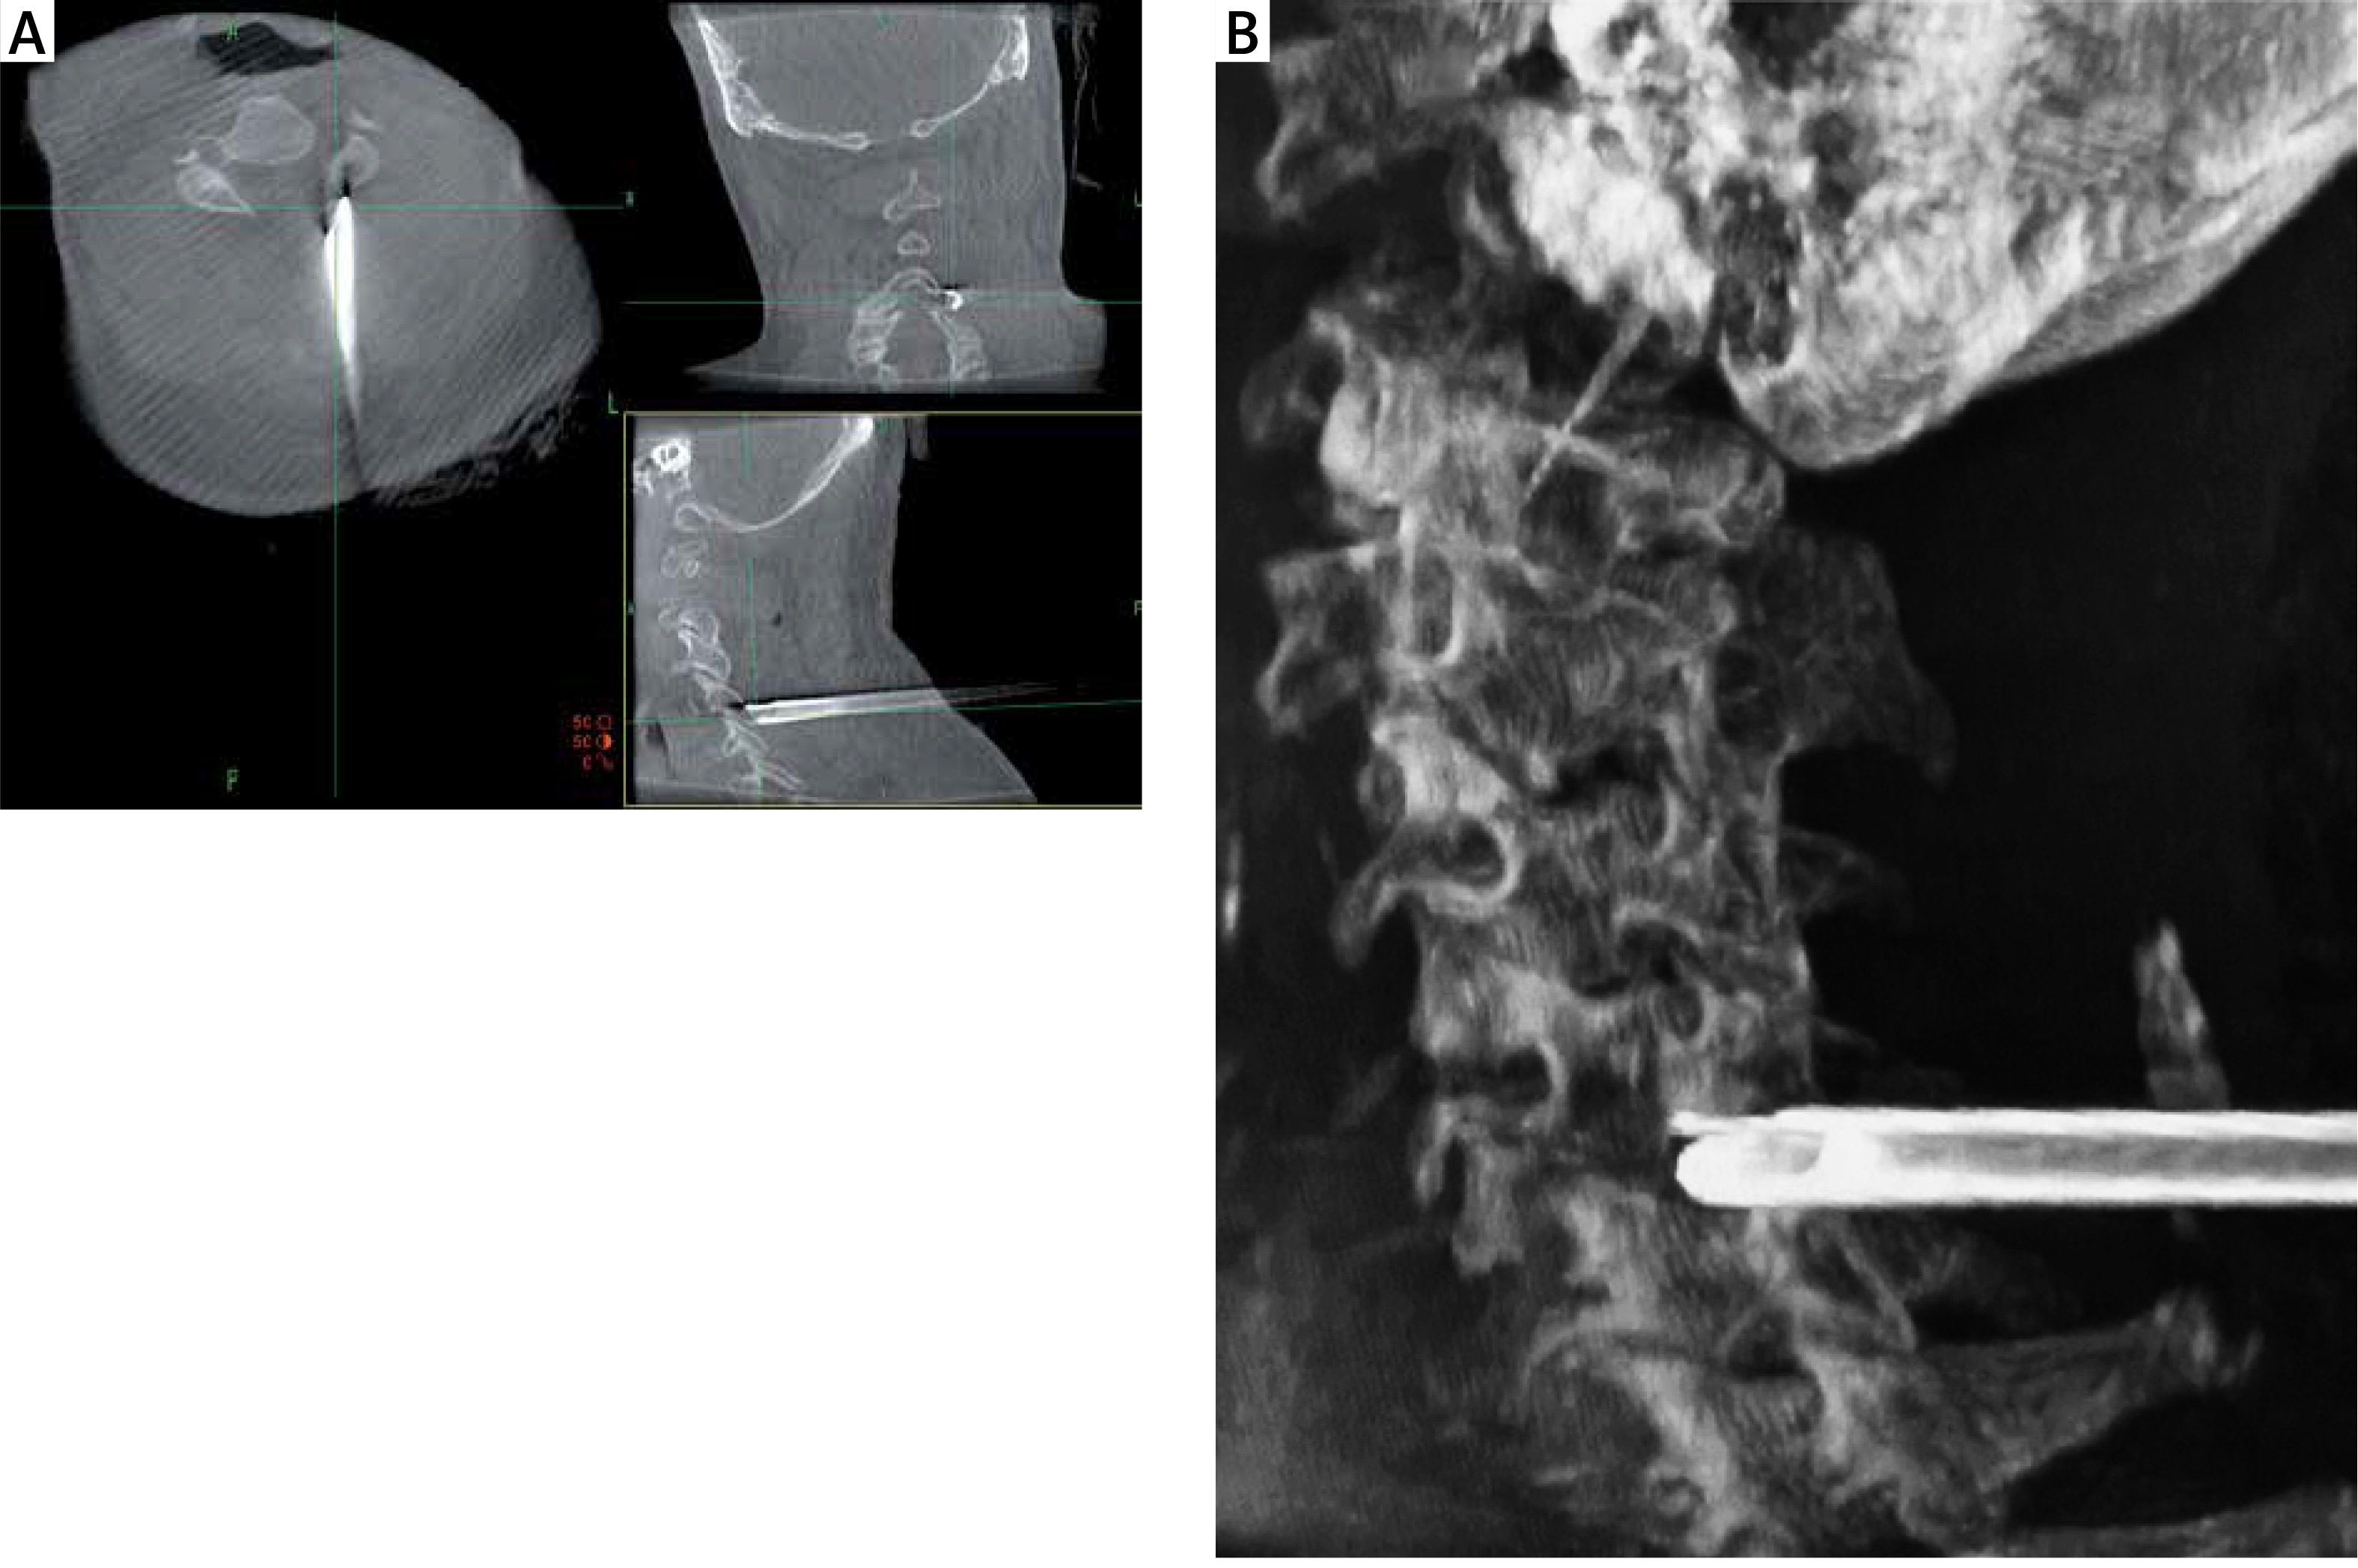 Posterior Percutaneous Endoscopic Cervical Foraminotomy And Discectomy For Degenerative Cervical